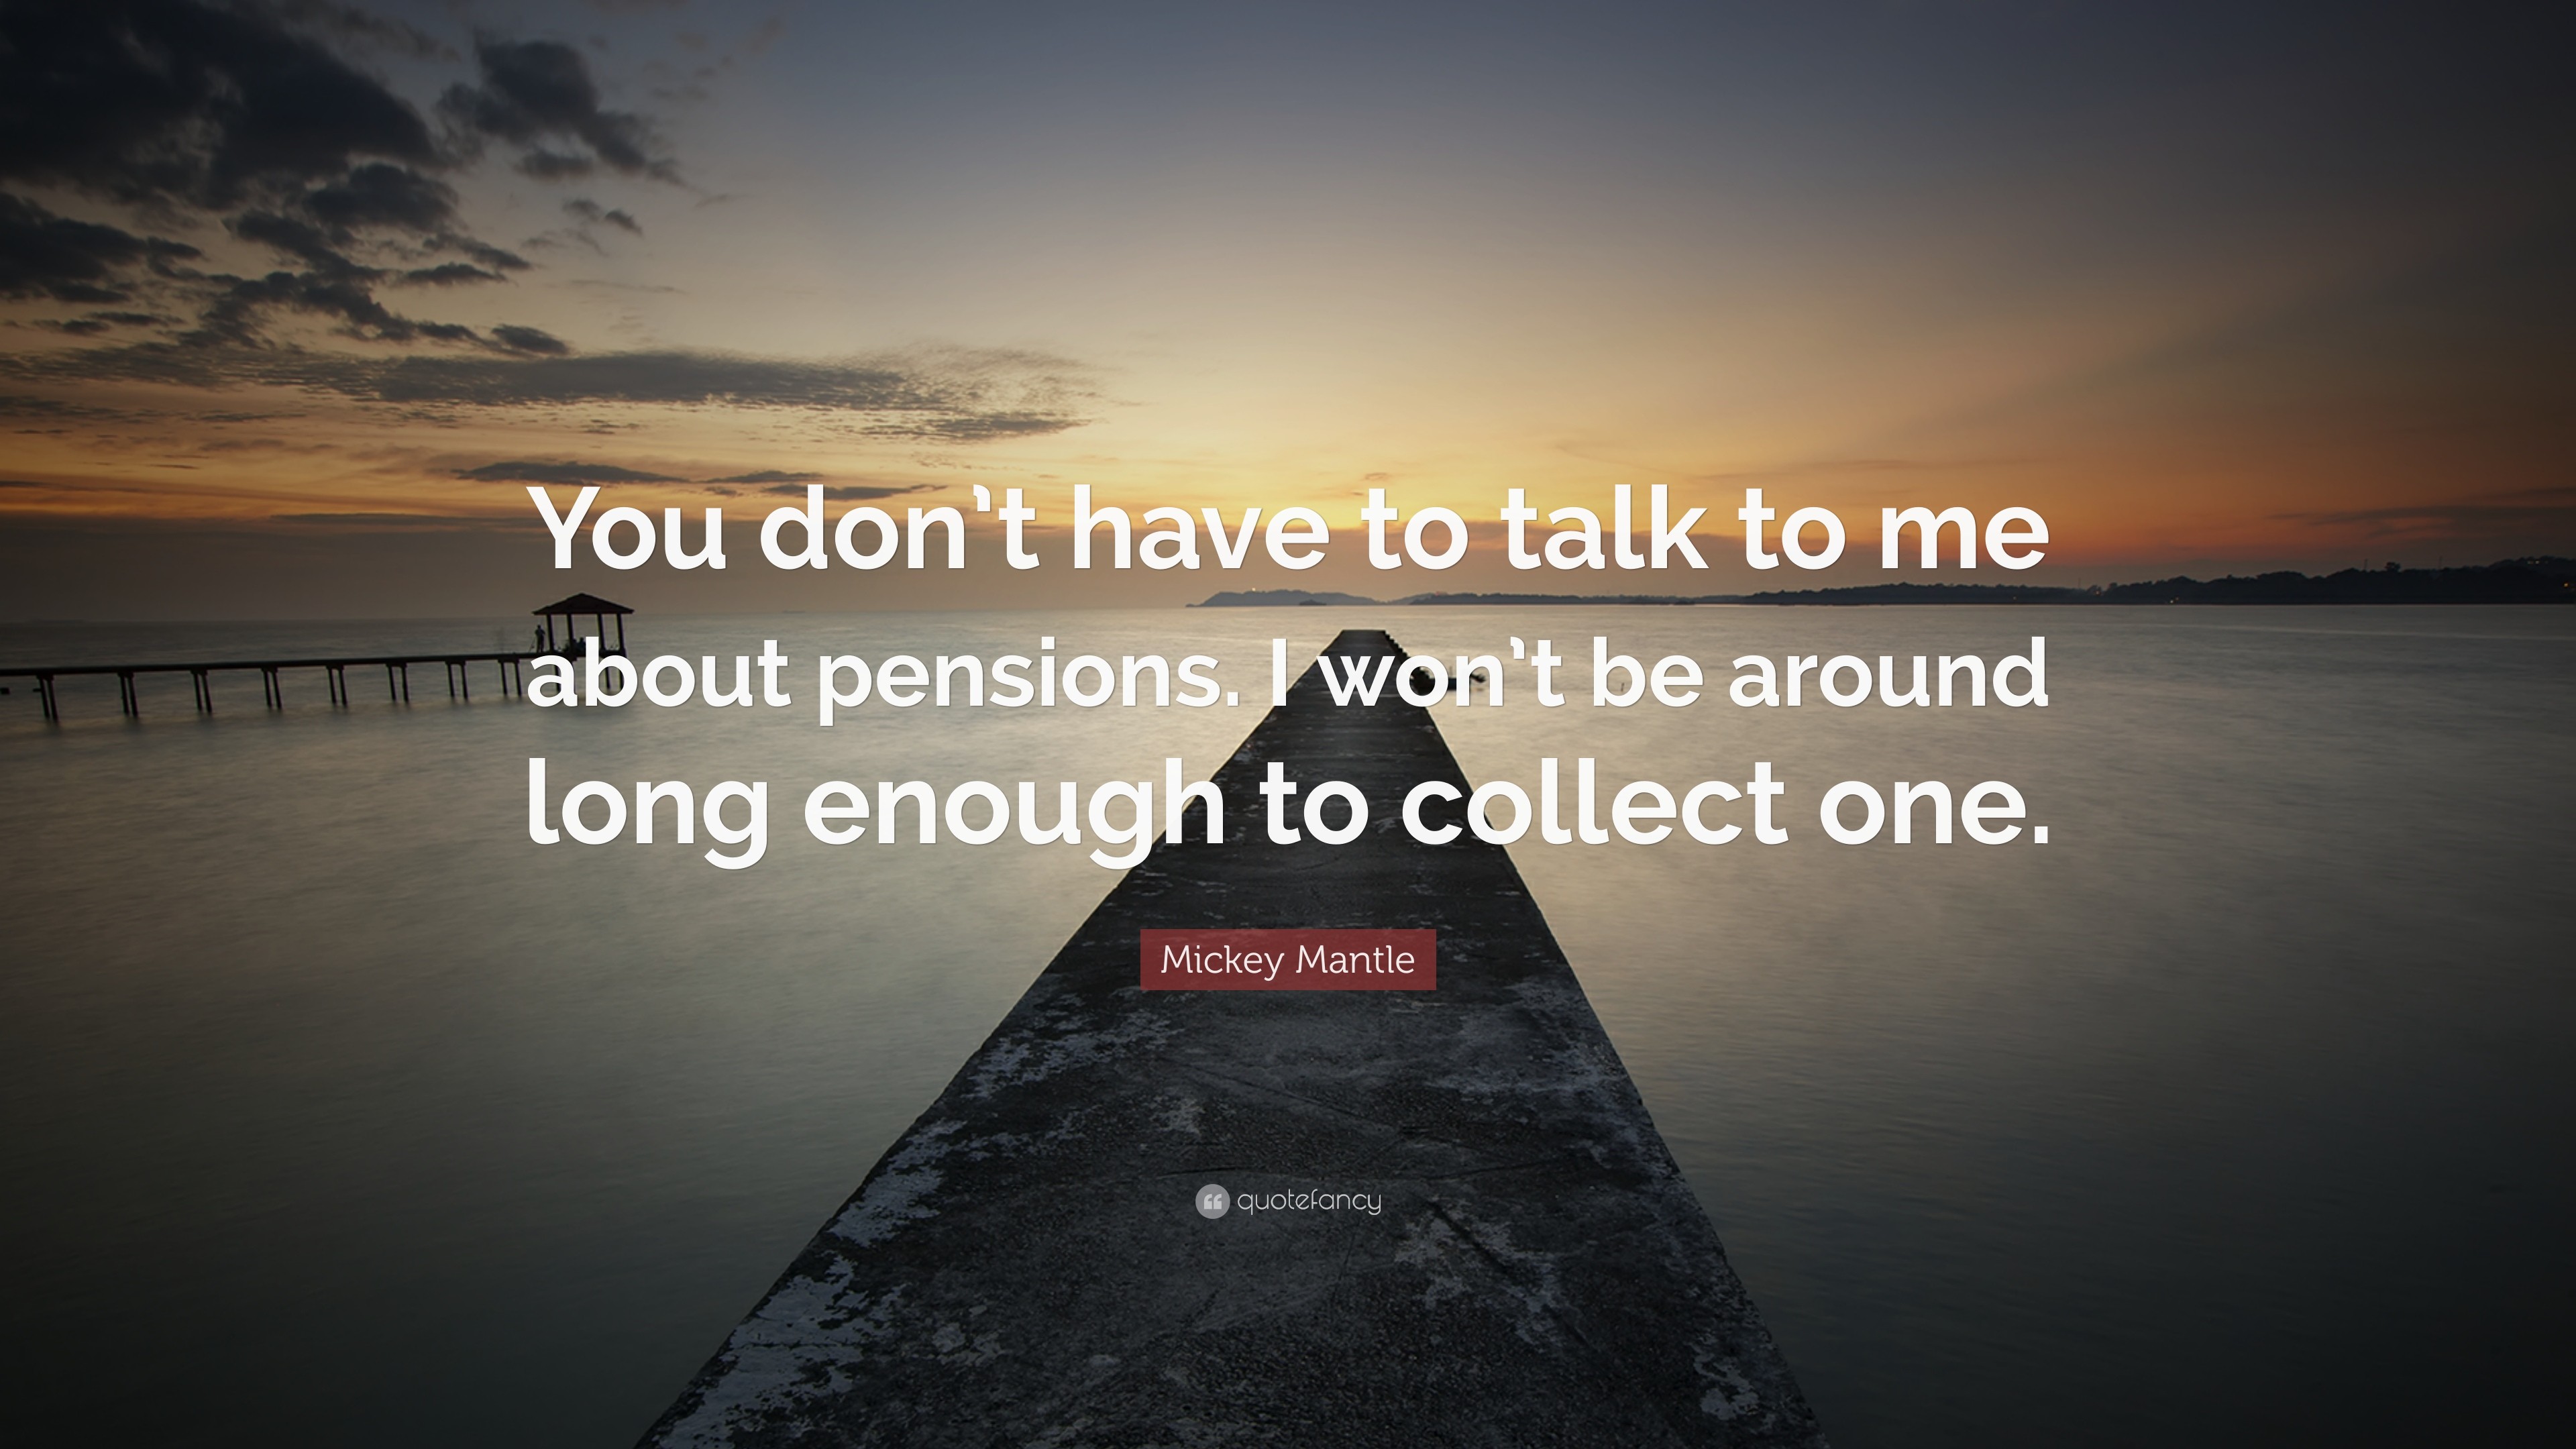 Mickey Mantle Quote: "You don't have to talk to me about pensions...